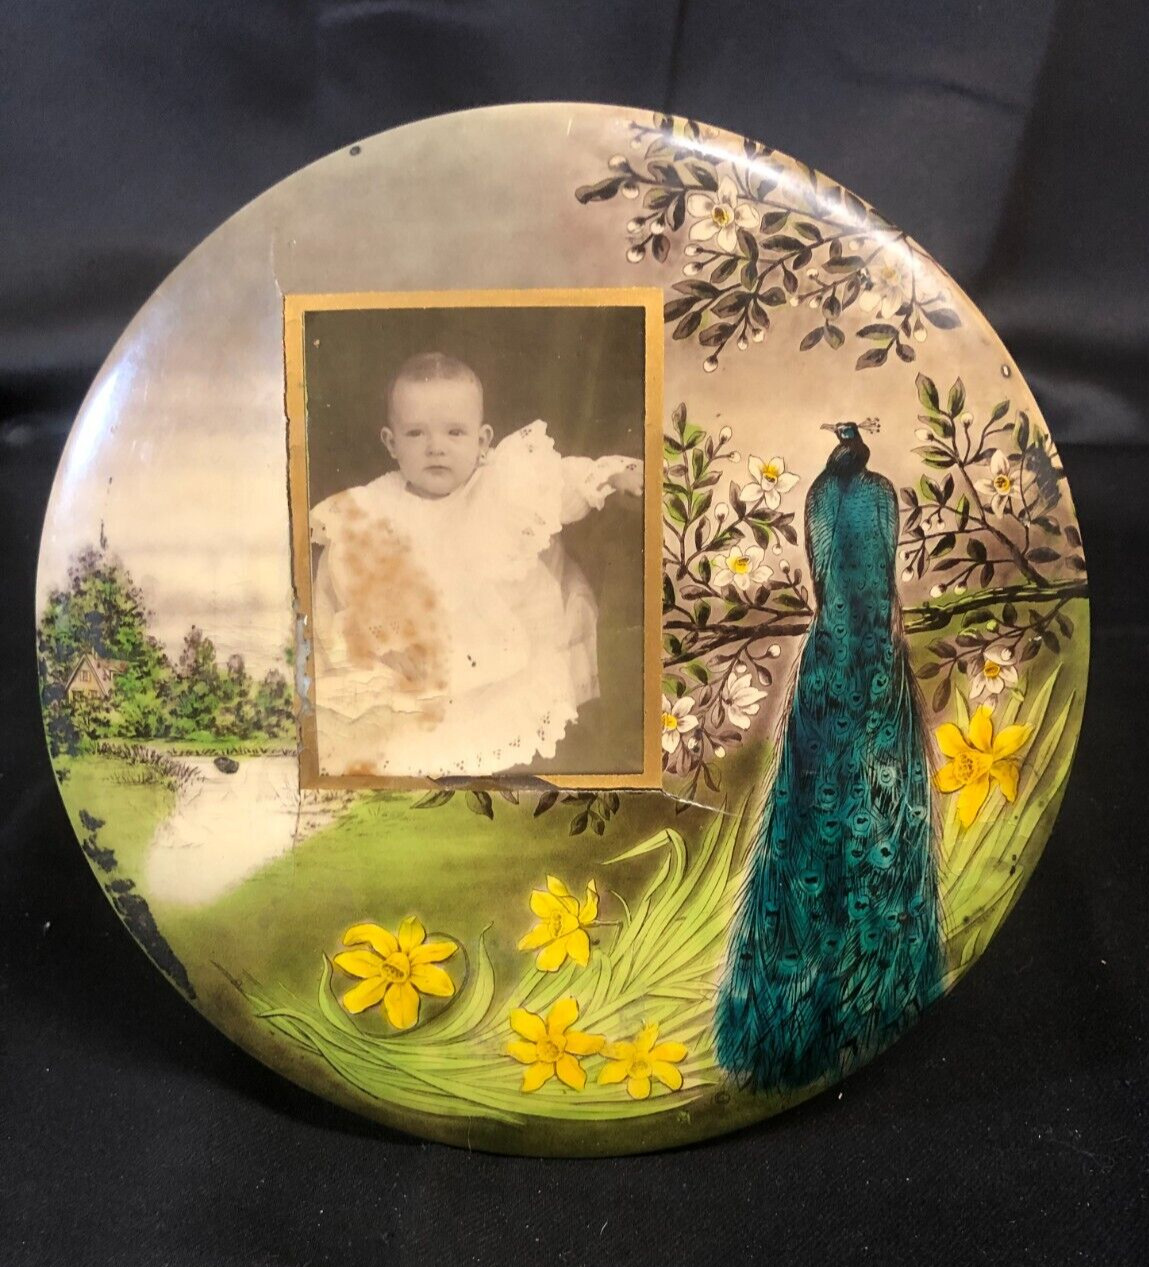 Antique Image of Baby Photo in Tin Floral & Peacock Plaque, Wall or Tabletop